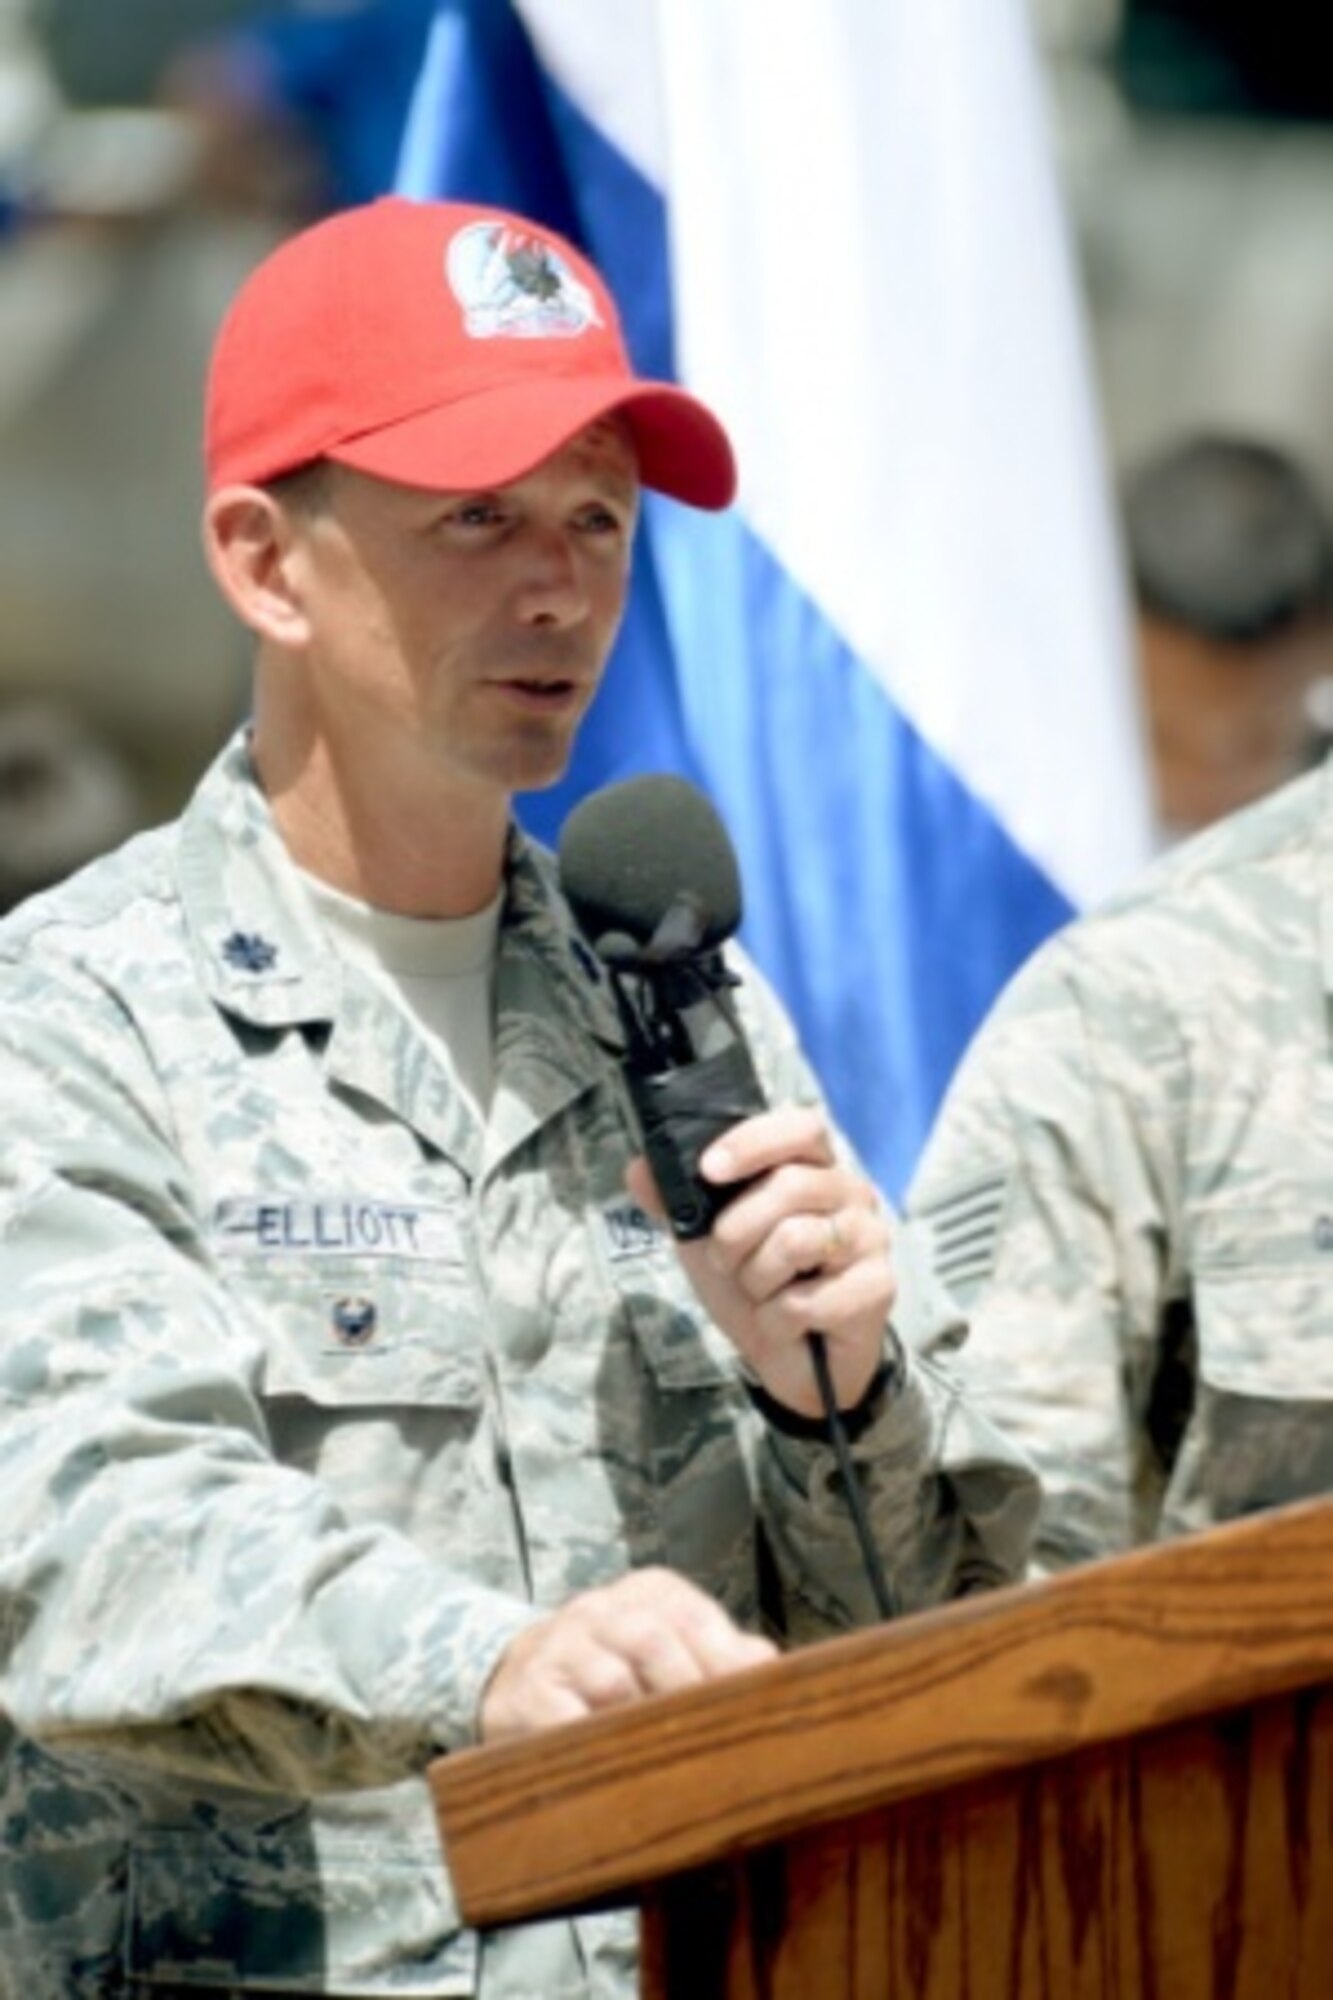 U.S. Air Force Lt. Col. Ryan Elliott, 823rd RED HORSE Squadron deputy commander and New Horizons Honduras exercise commander, out of Hurlburt Field, Fla., speaks at the ribbon-cutting ceremony for the new two-classroom schoolhouse at the Gabriela Mistral school in Ocotes Alto, Honduras, July 28, 2015. The event marked the official opening of the building which was one of the key projects as part of the New Horizons Honduras 2015 training exercise taking place in and around Trujillo, Honduras. New Horizons was launched in the 1980s and is an annual joint humanitarian assistance exercise that U.S. Southern Command conducts with a partner nation in Central America, South America or the Caribbean. The exercise improves joint training readiness of U.S. and partner nation civil engineers, medical professionals and support personnel through humanitarian assistance activities. (U.S. Air Force photo by Capt. David J. Murphy/Released)